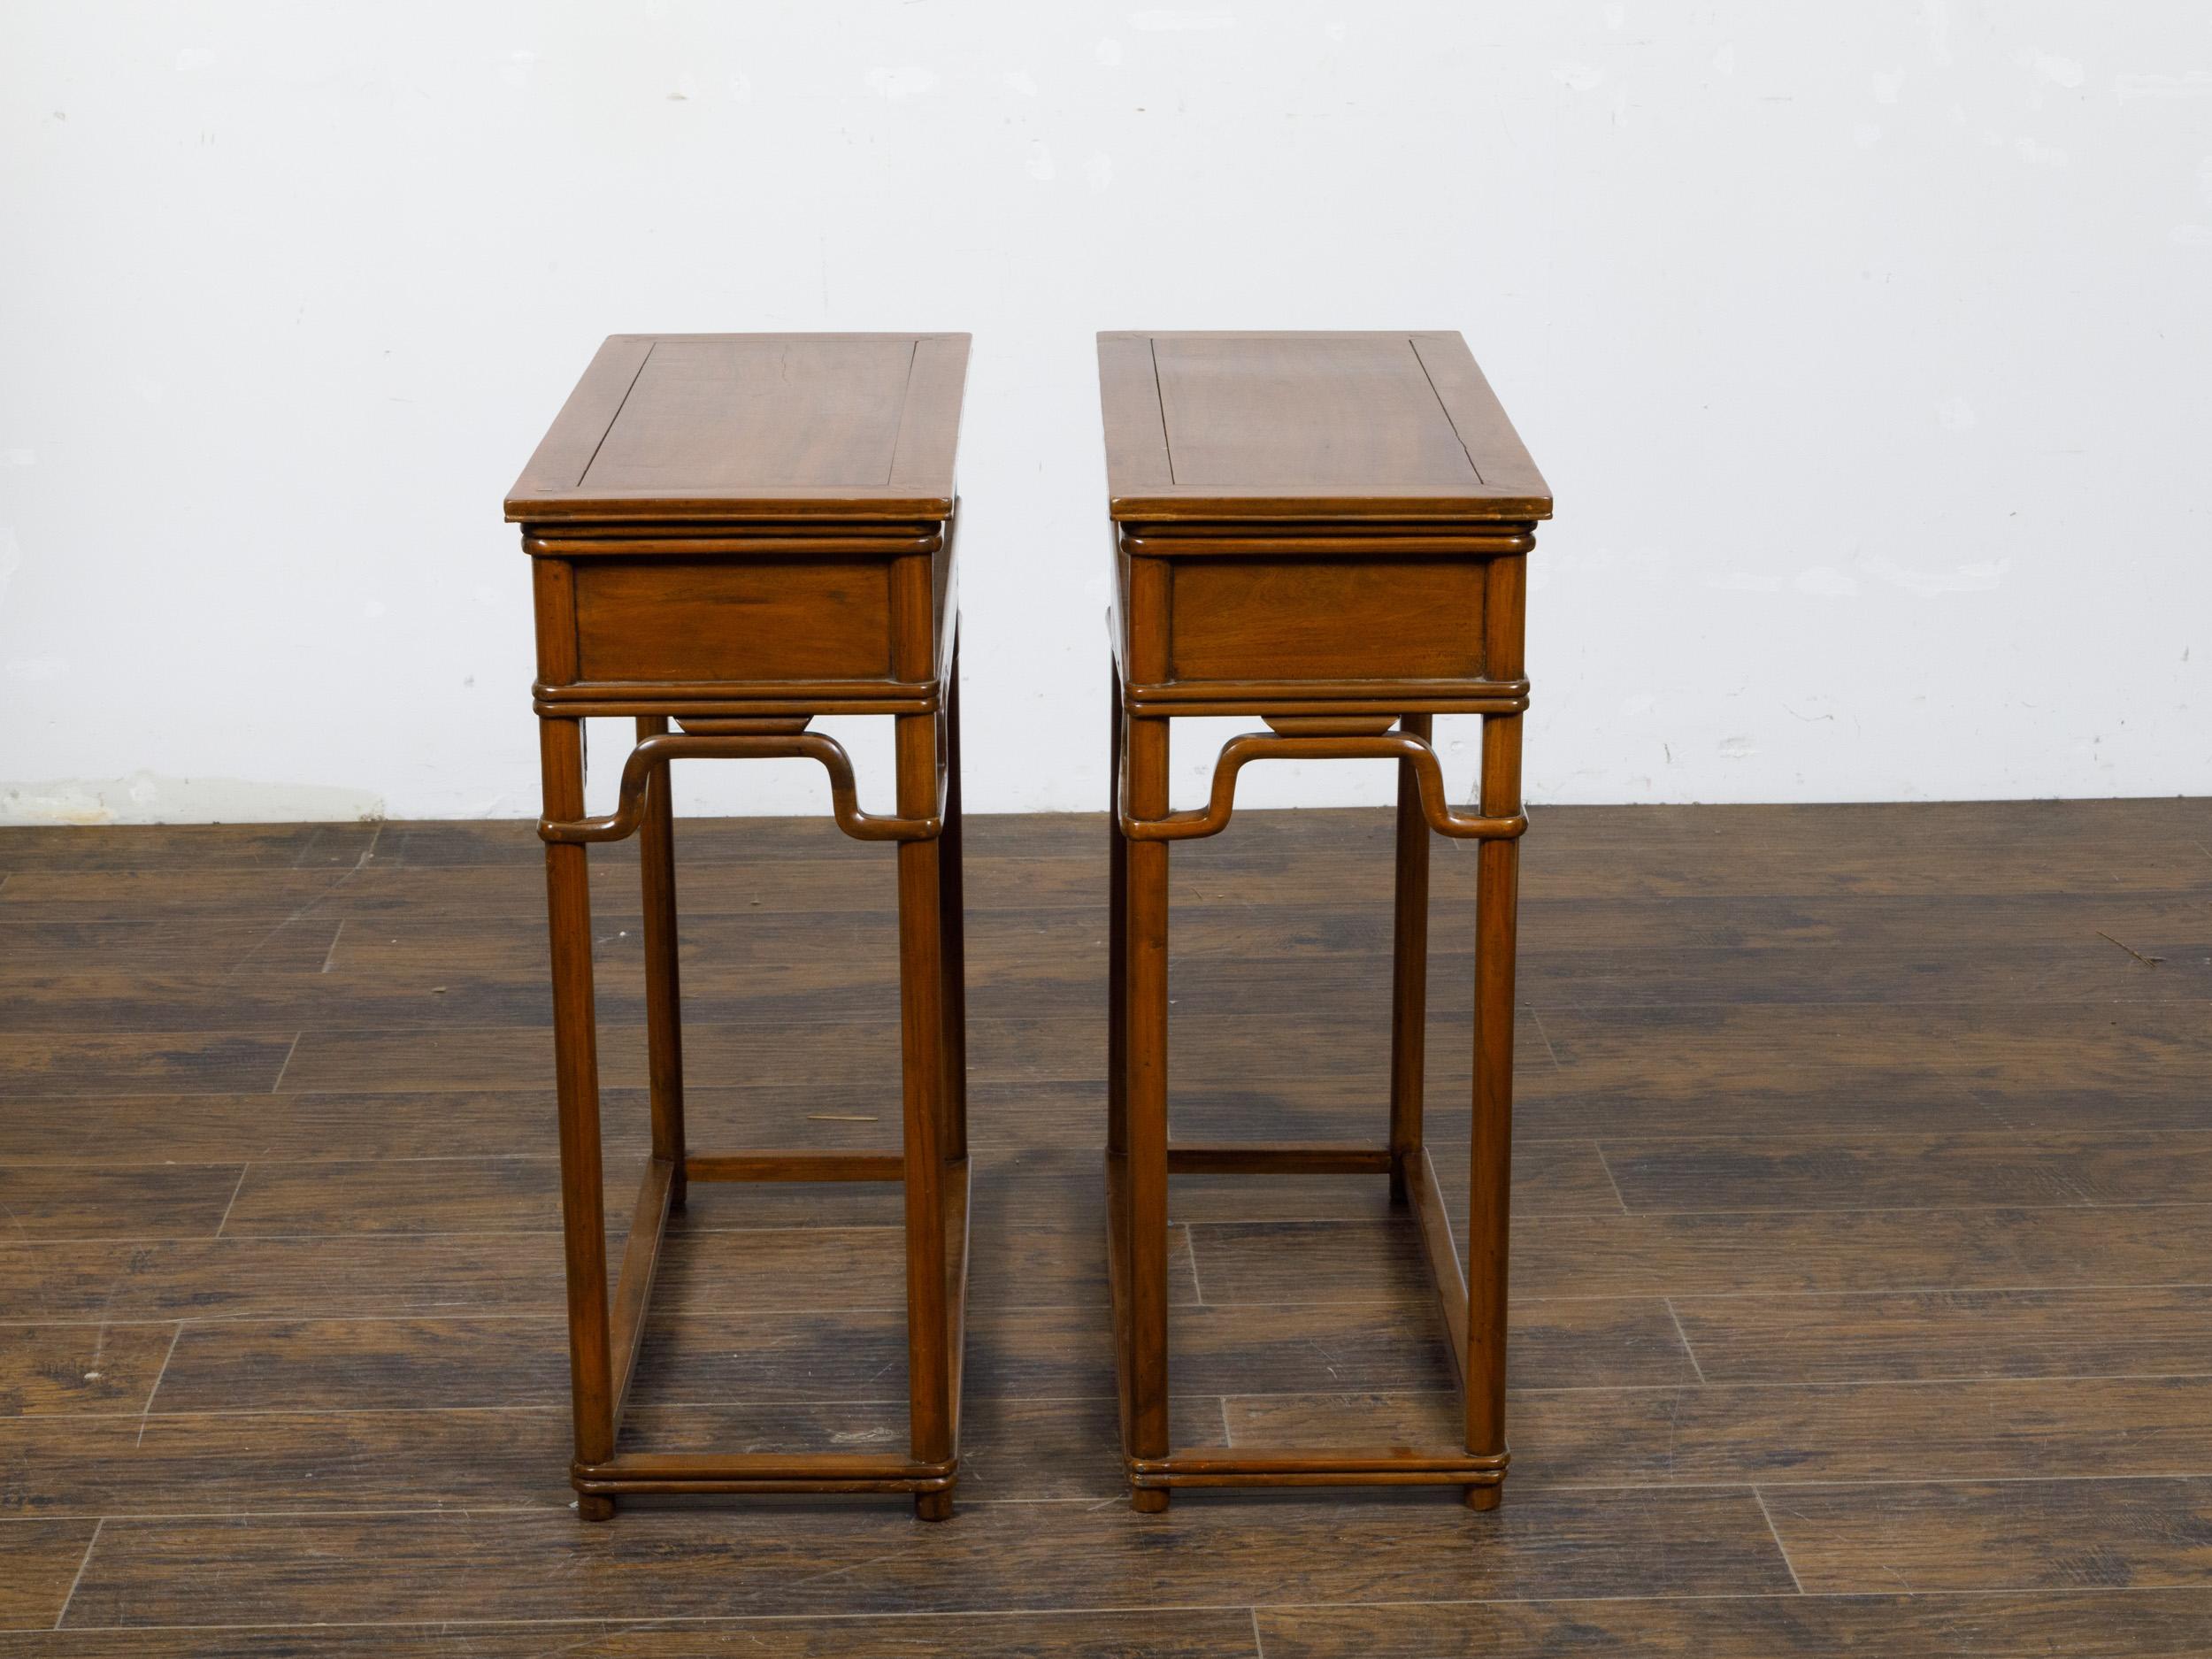 Pair of Teak 19th Century Console Tables with Drawers and Humpback Stretchers In Good Condition For Sale In Atlanta, GA